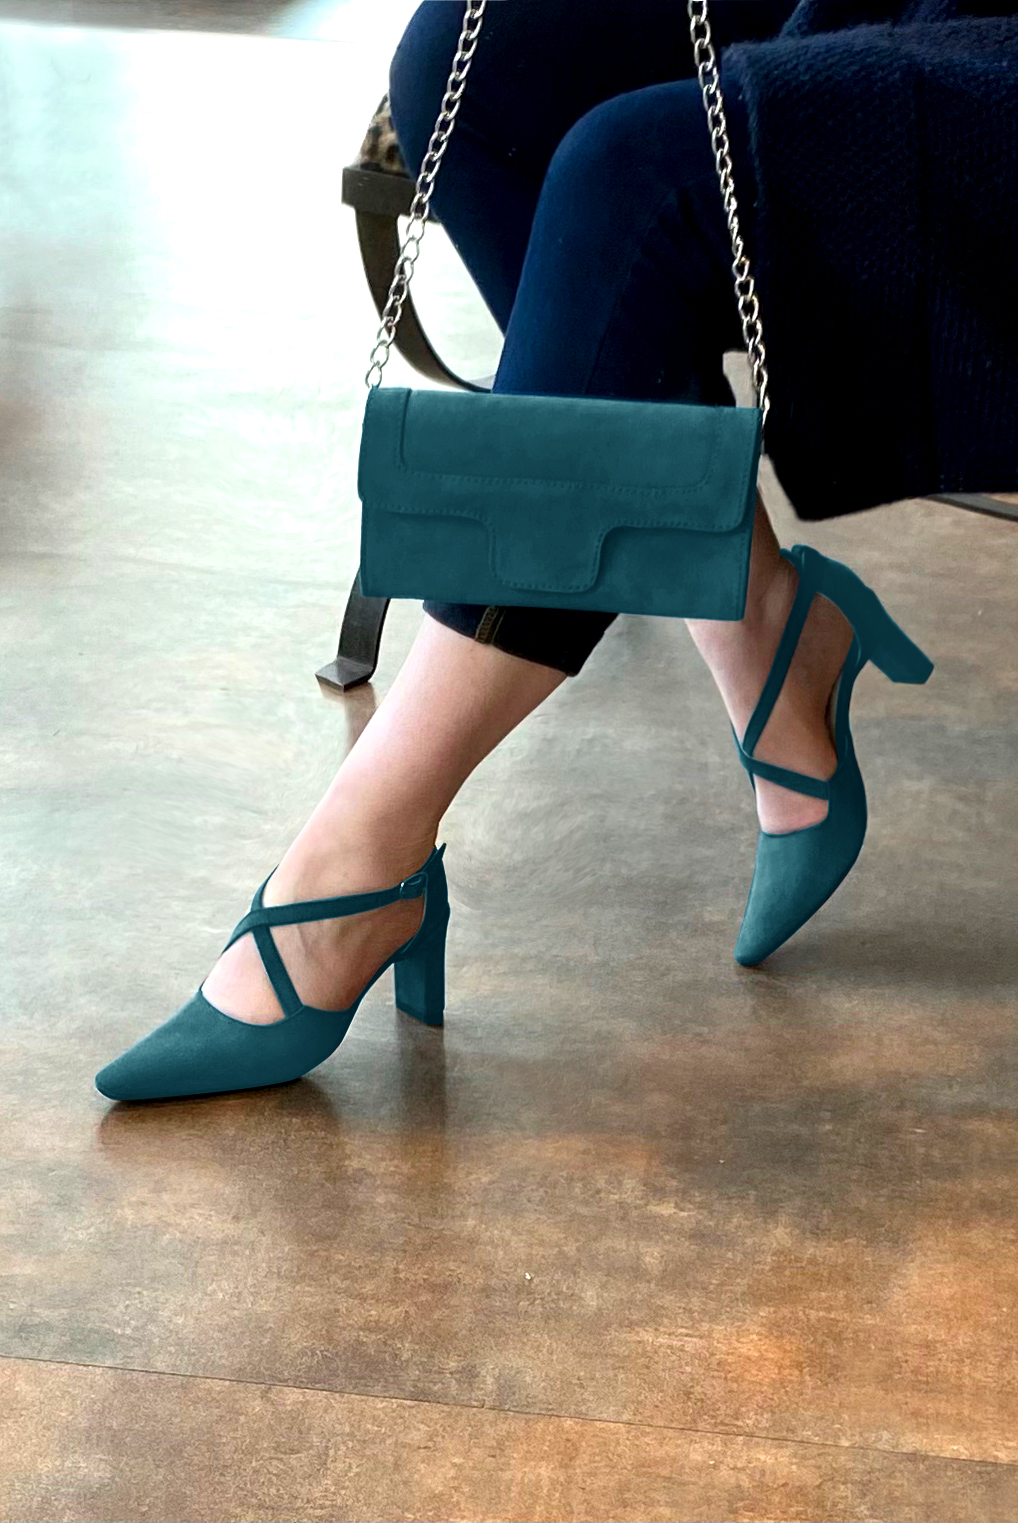 Peacock blue women's open side shoes, with crossed straps. Tapered toe. High comma heels. Worn view - Florence KOOIJMAN